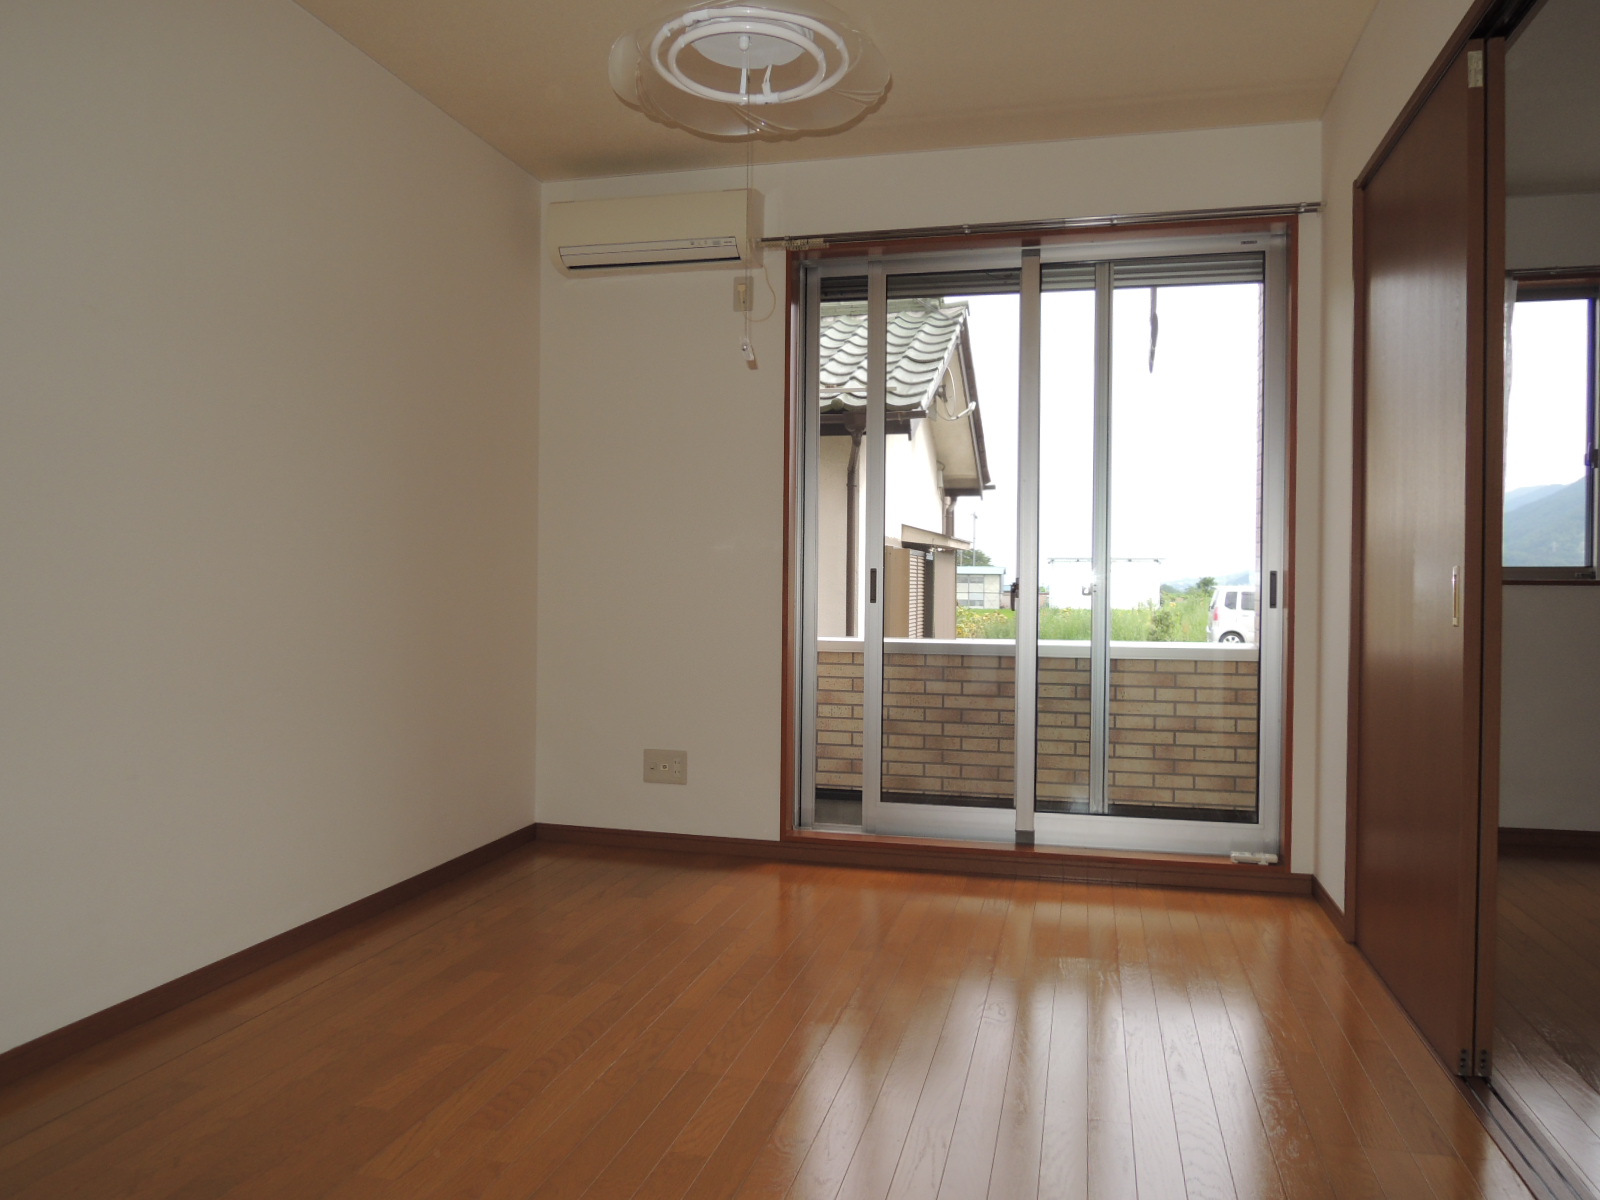 Living and room. Western-style room 6 tatami